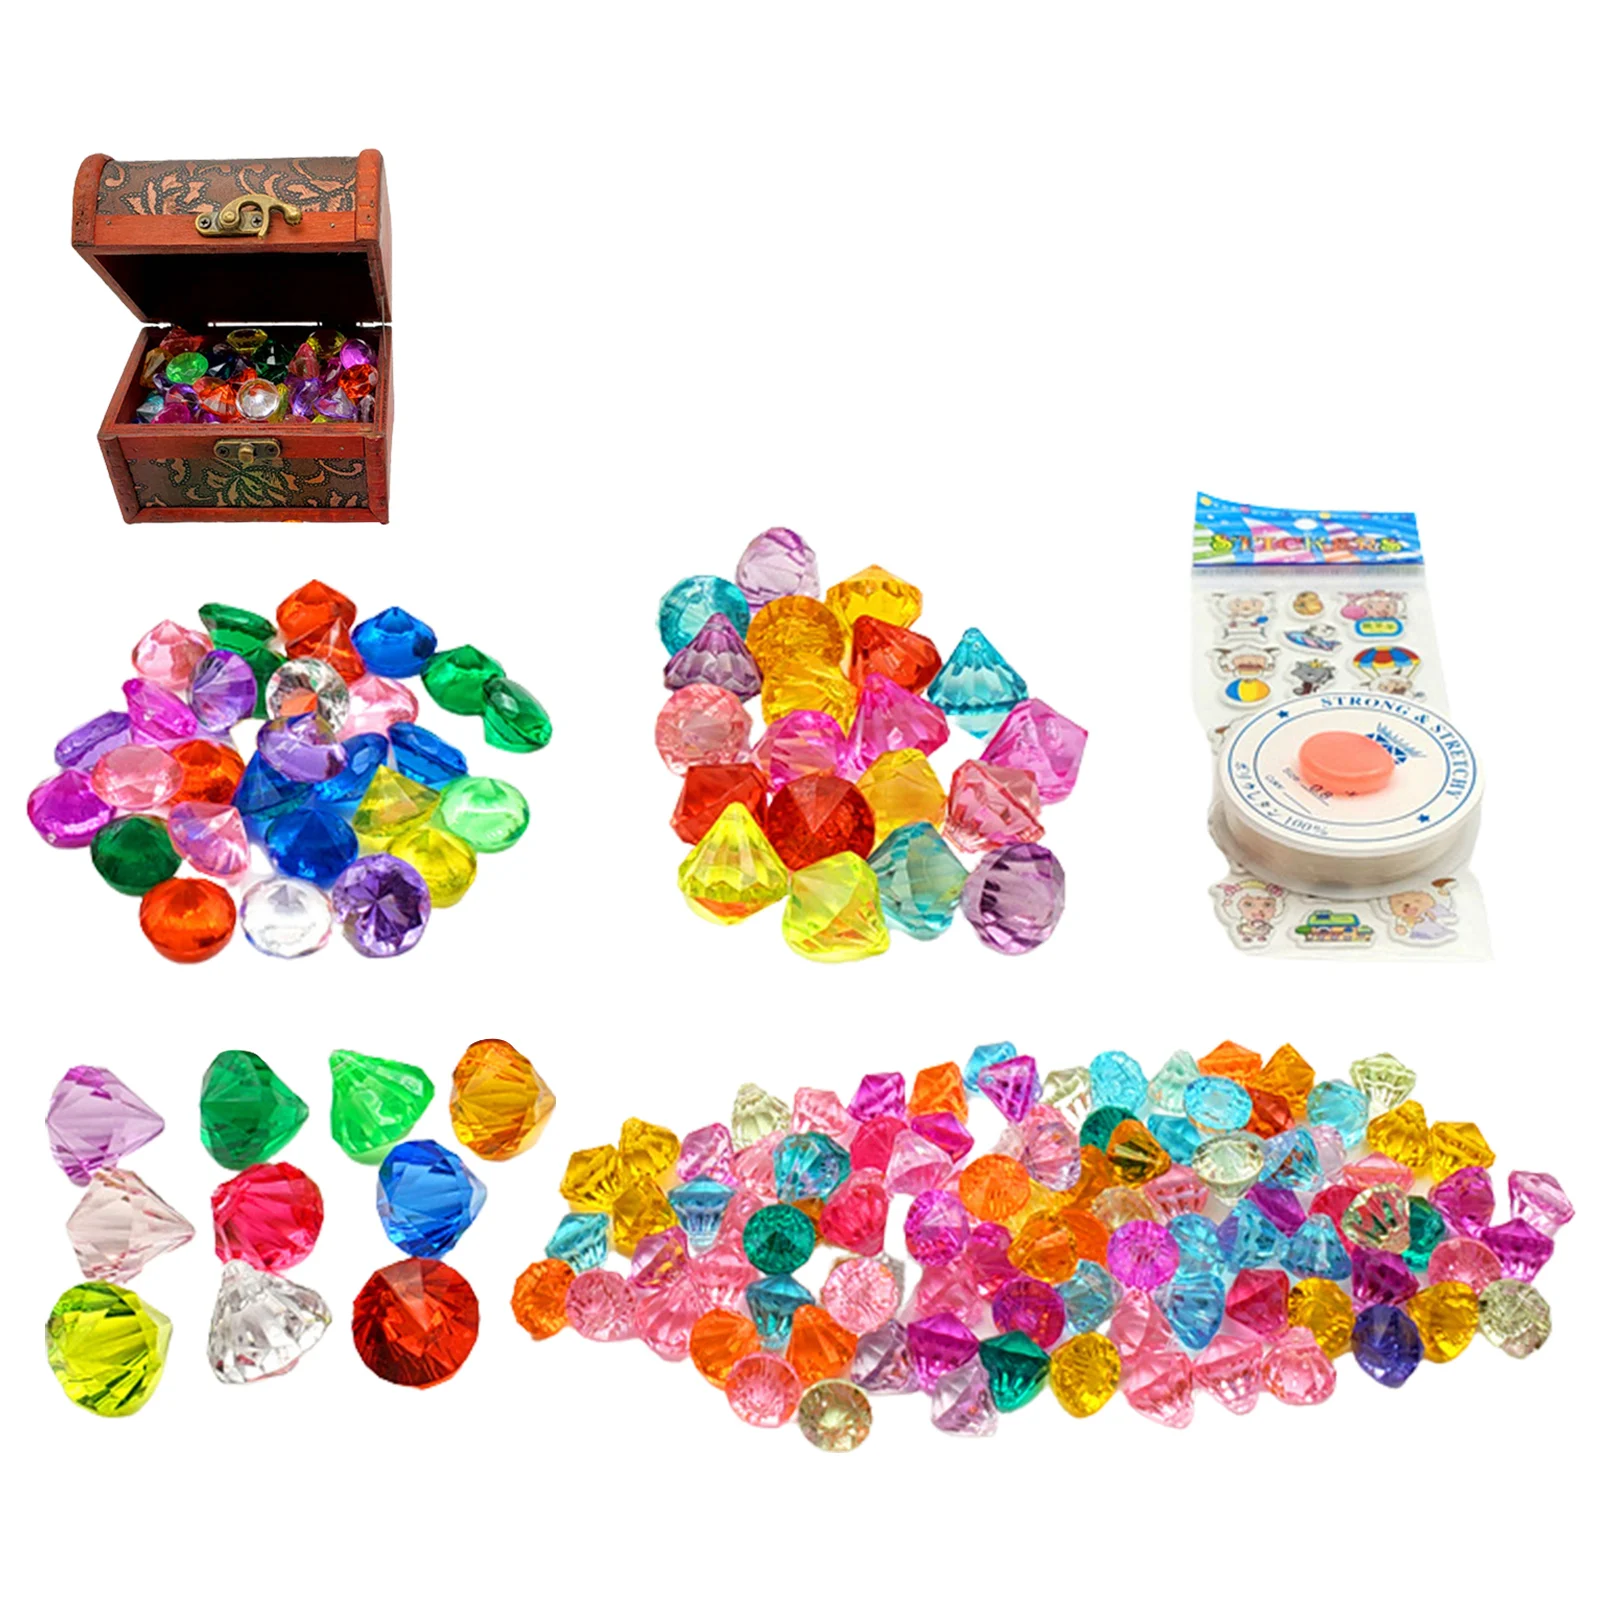 

Gems Pirate Treasure Toy Acrylic Gems Set Multicolor Diamonds Gemstones With Treasures Chest Crystal Stone Table Decorations